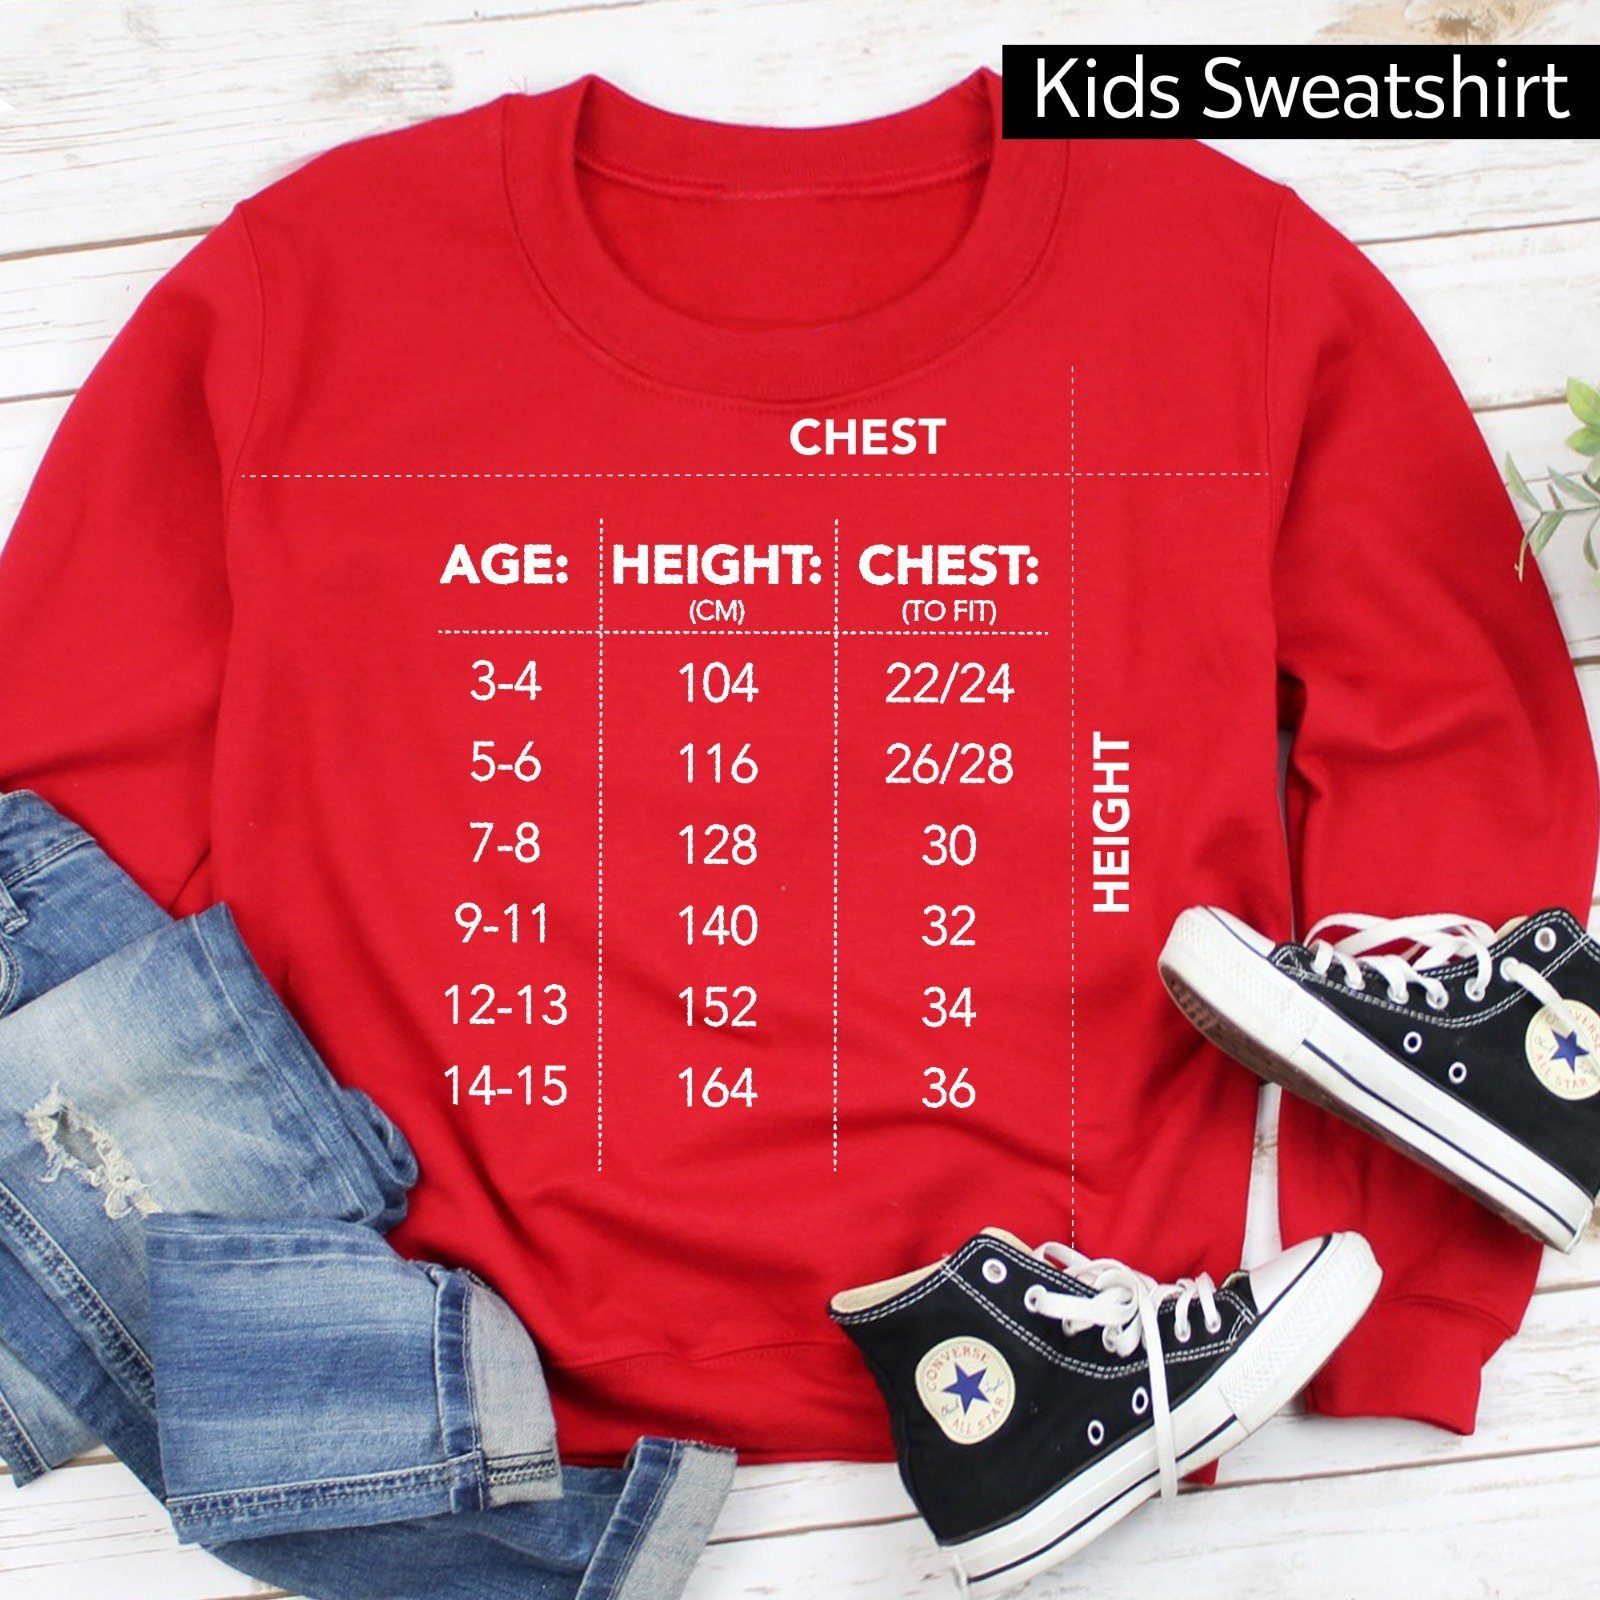 Personalised ugly Christmas jumper with names, Unisex Adult & Kids size sweatshirt